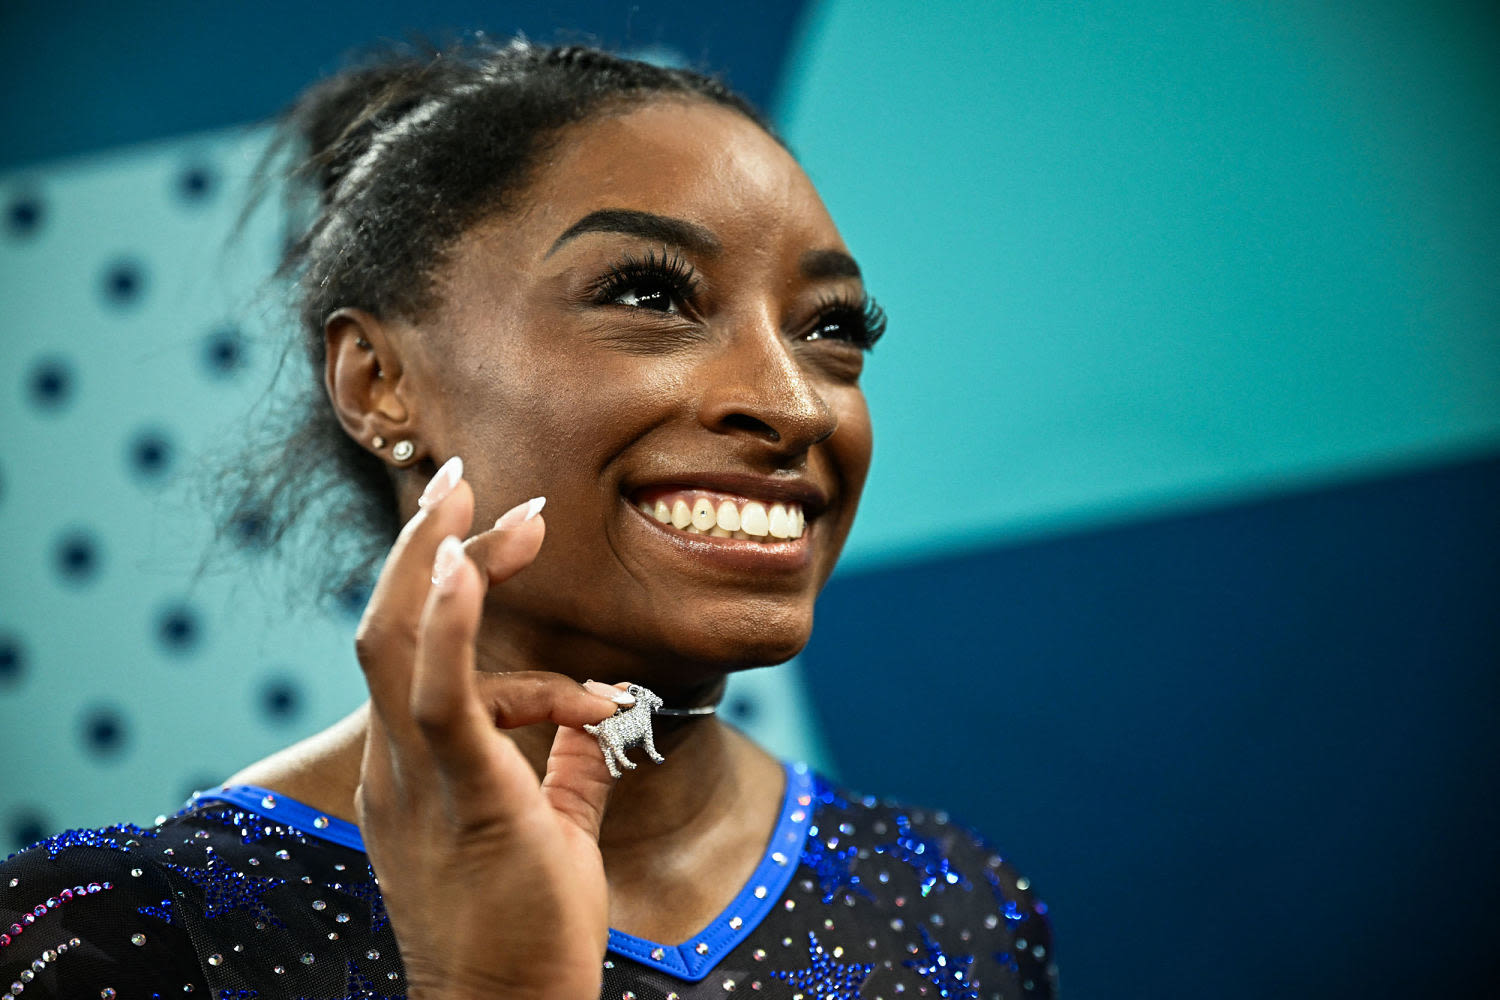 Simone Biles cements her GOAT status in Paris with ... a diamond goat necklace